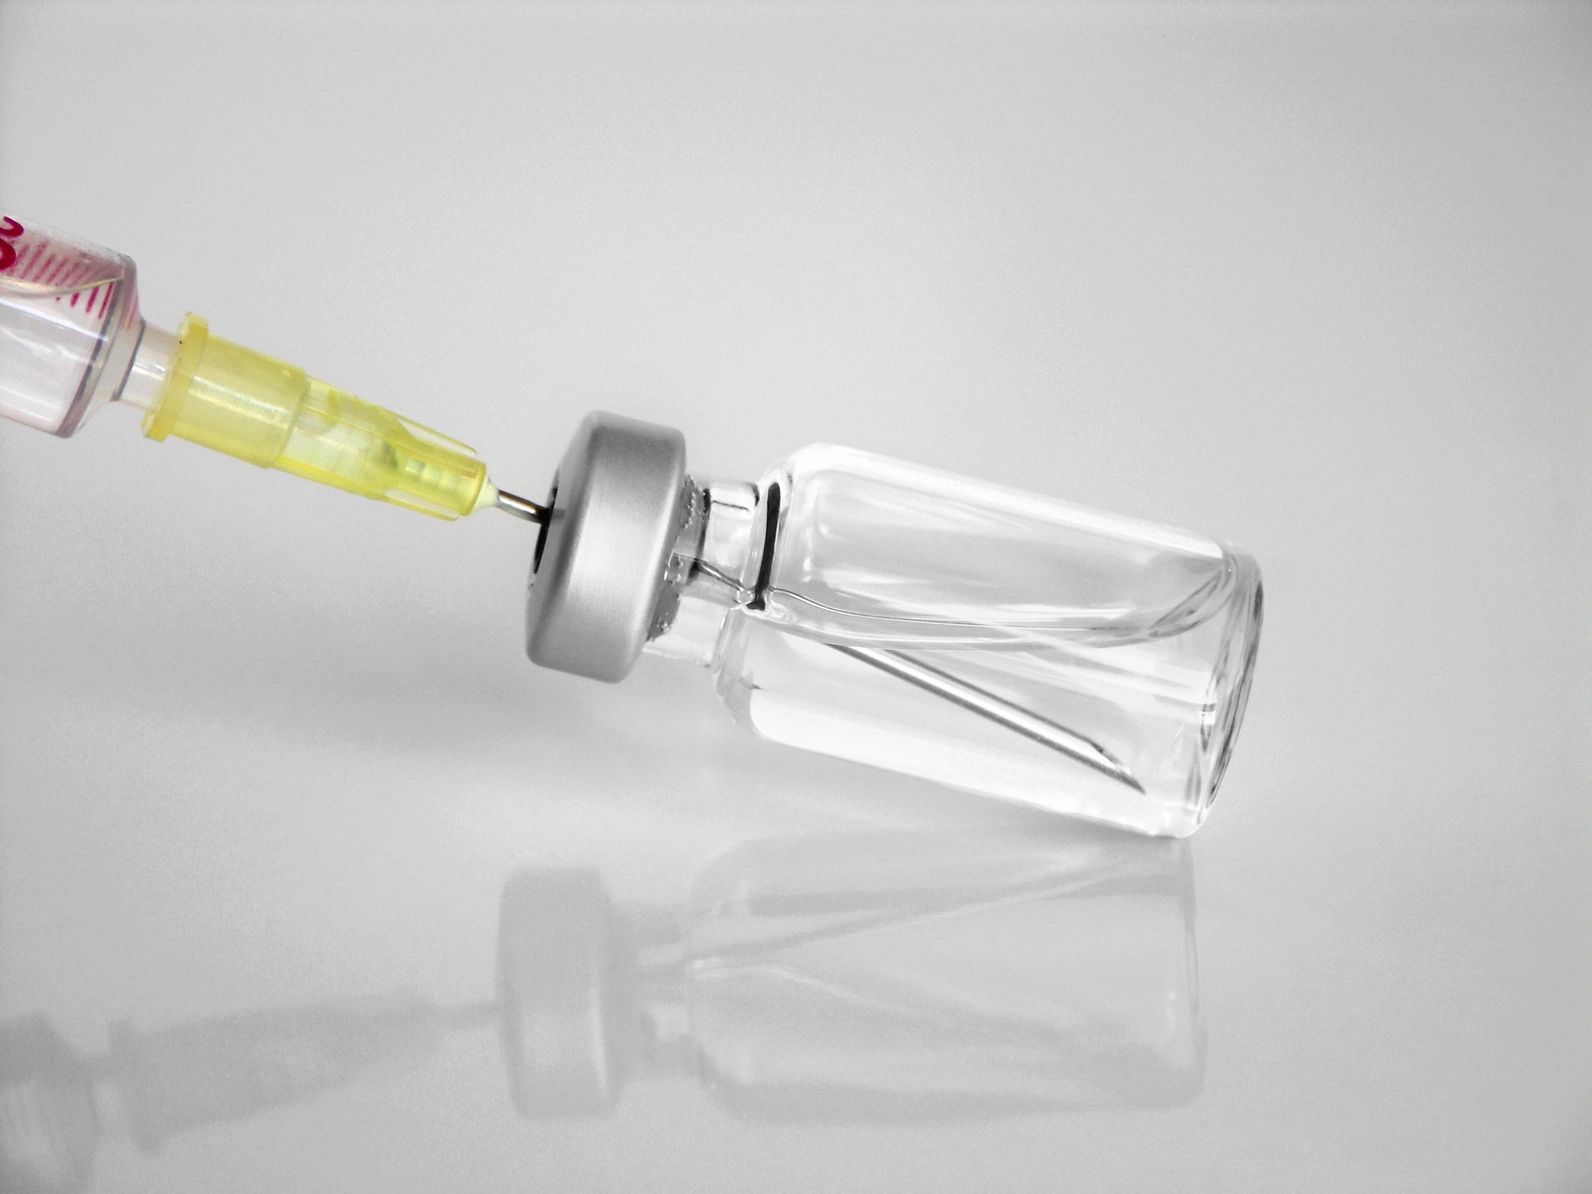 Syringe drawing from a vial